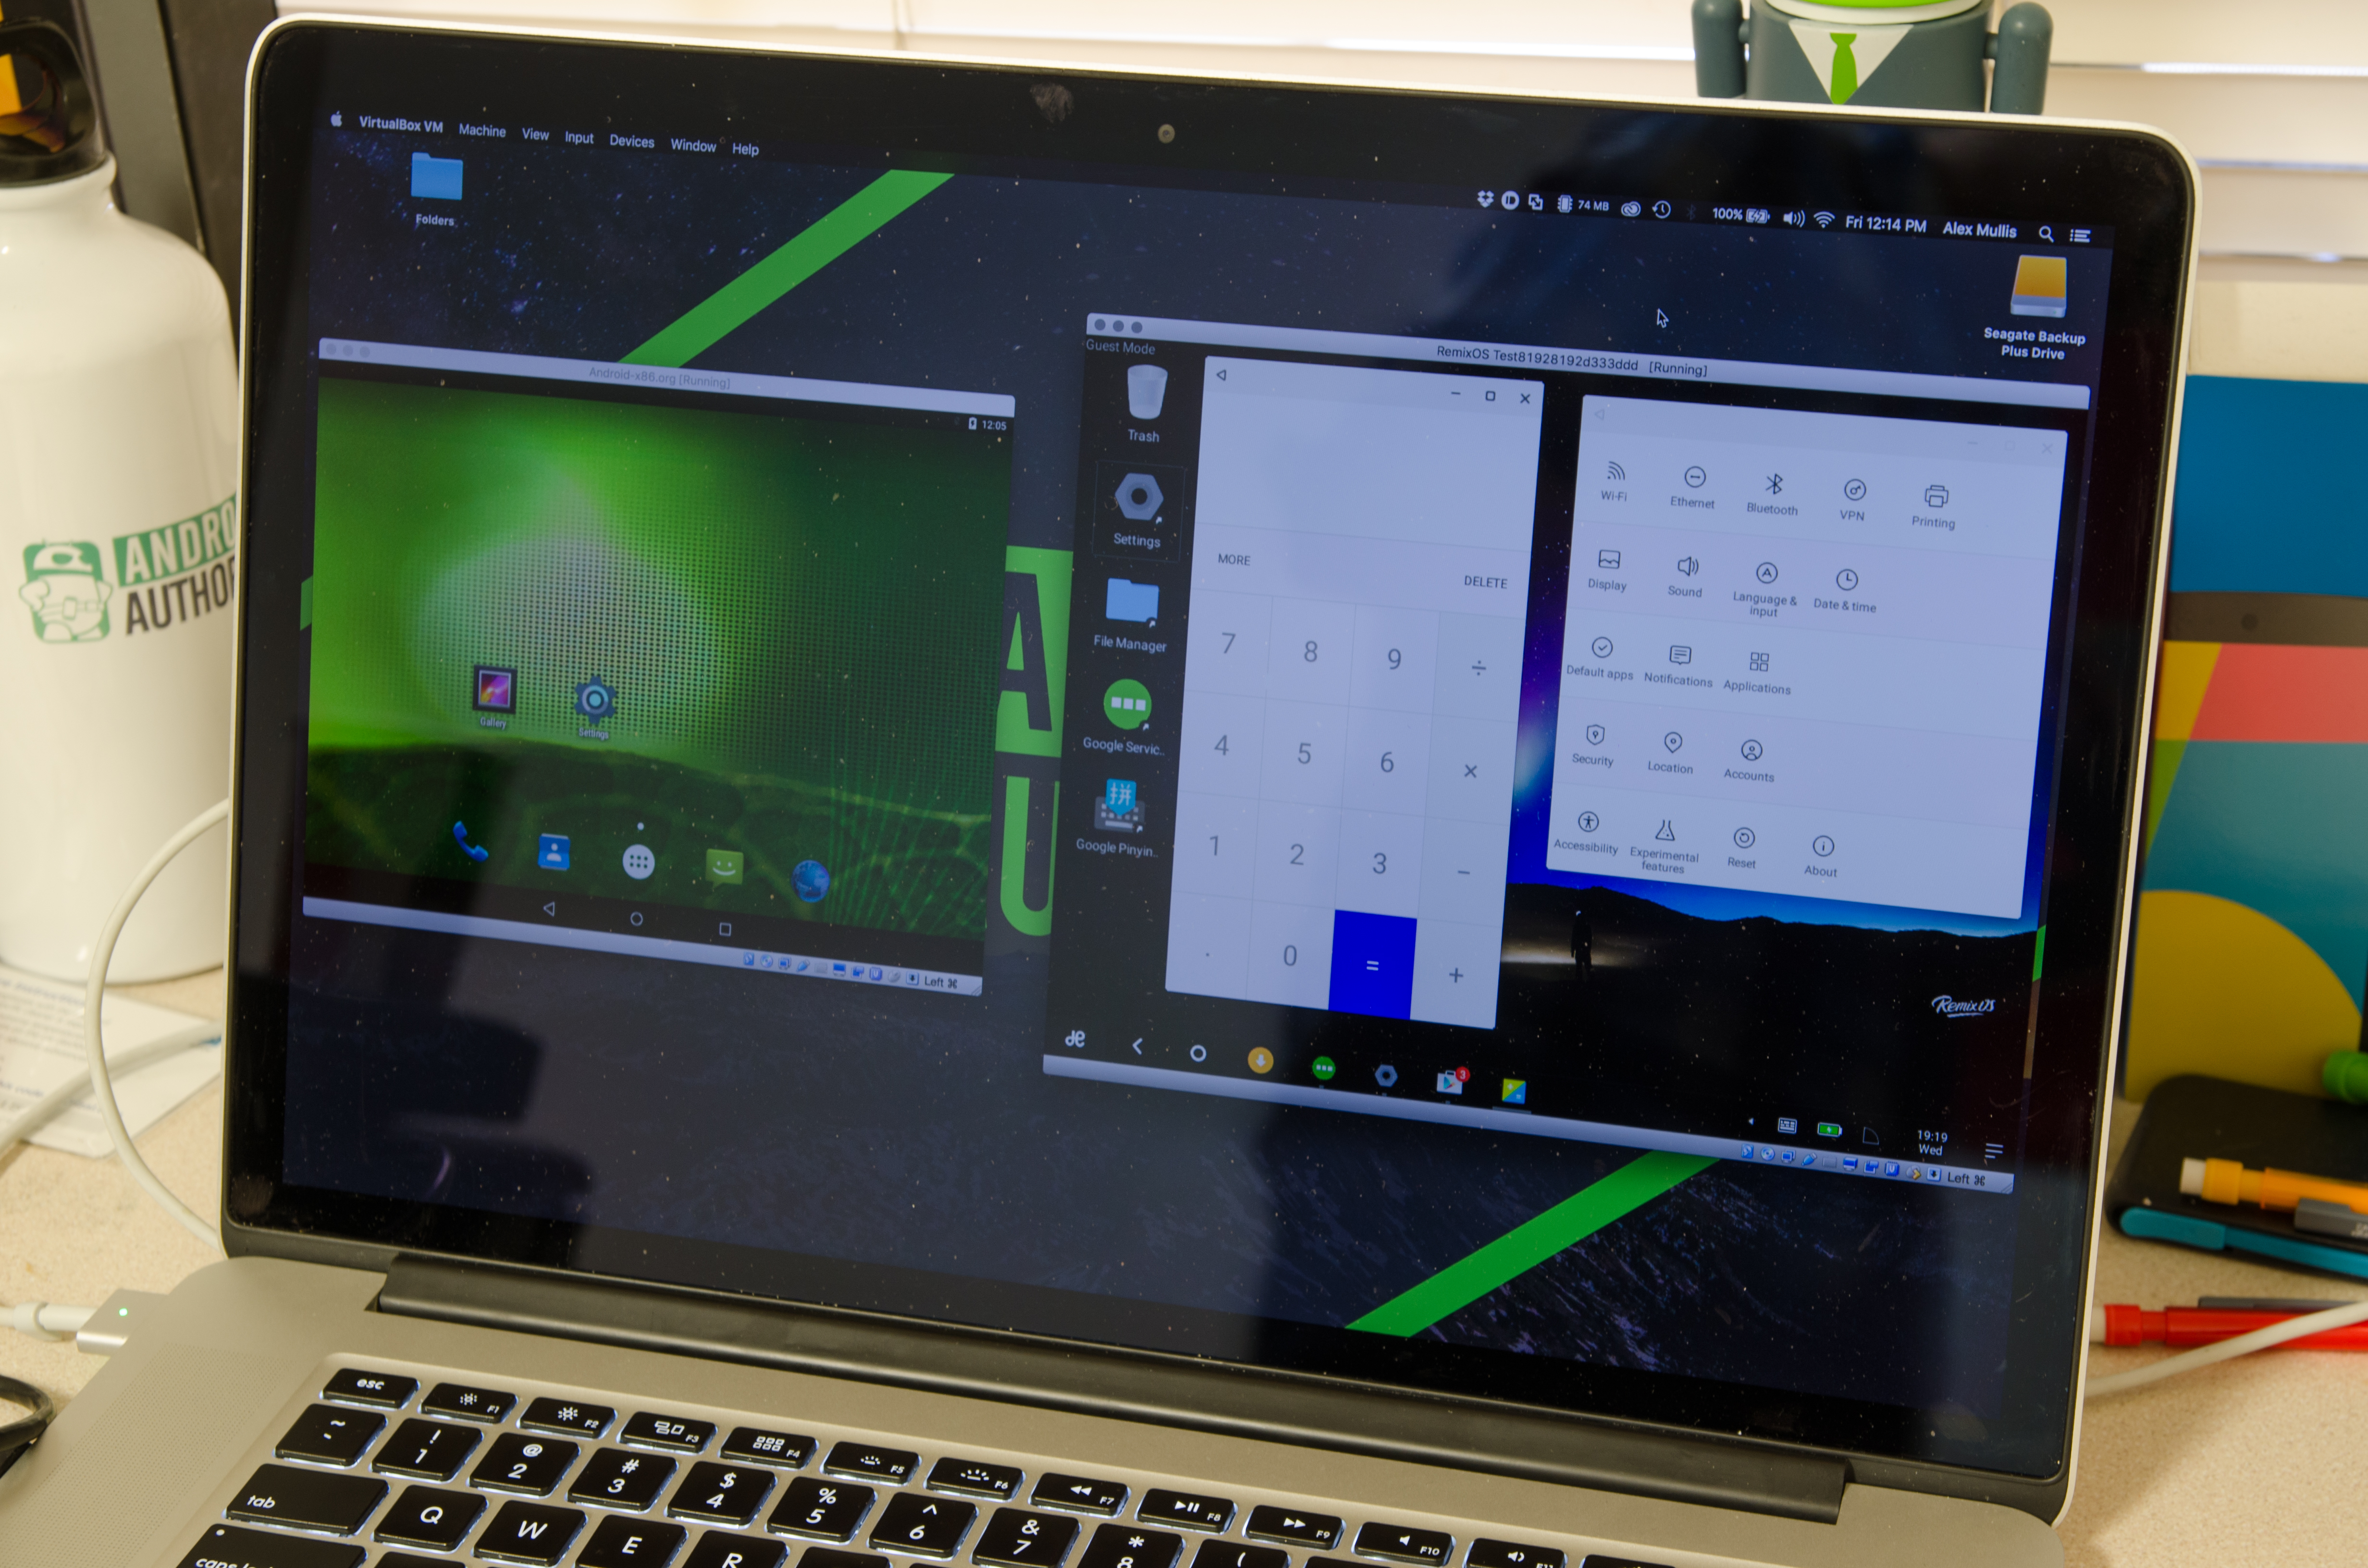 Android-x86 (Left), Remix OS (Right)